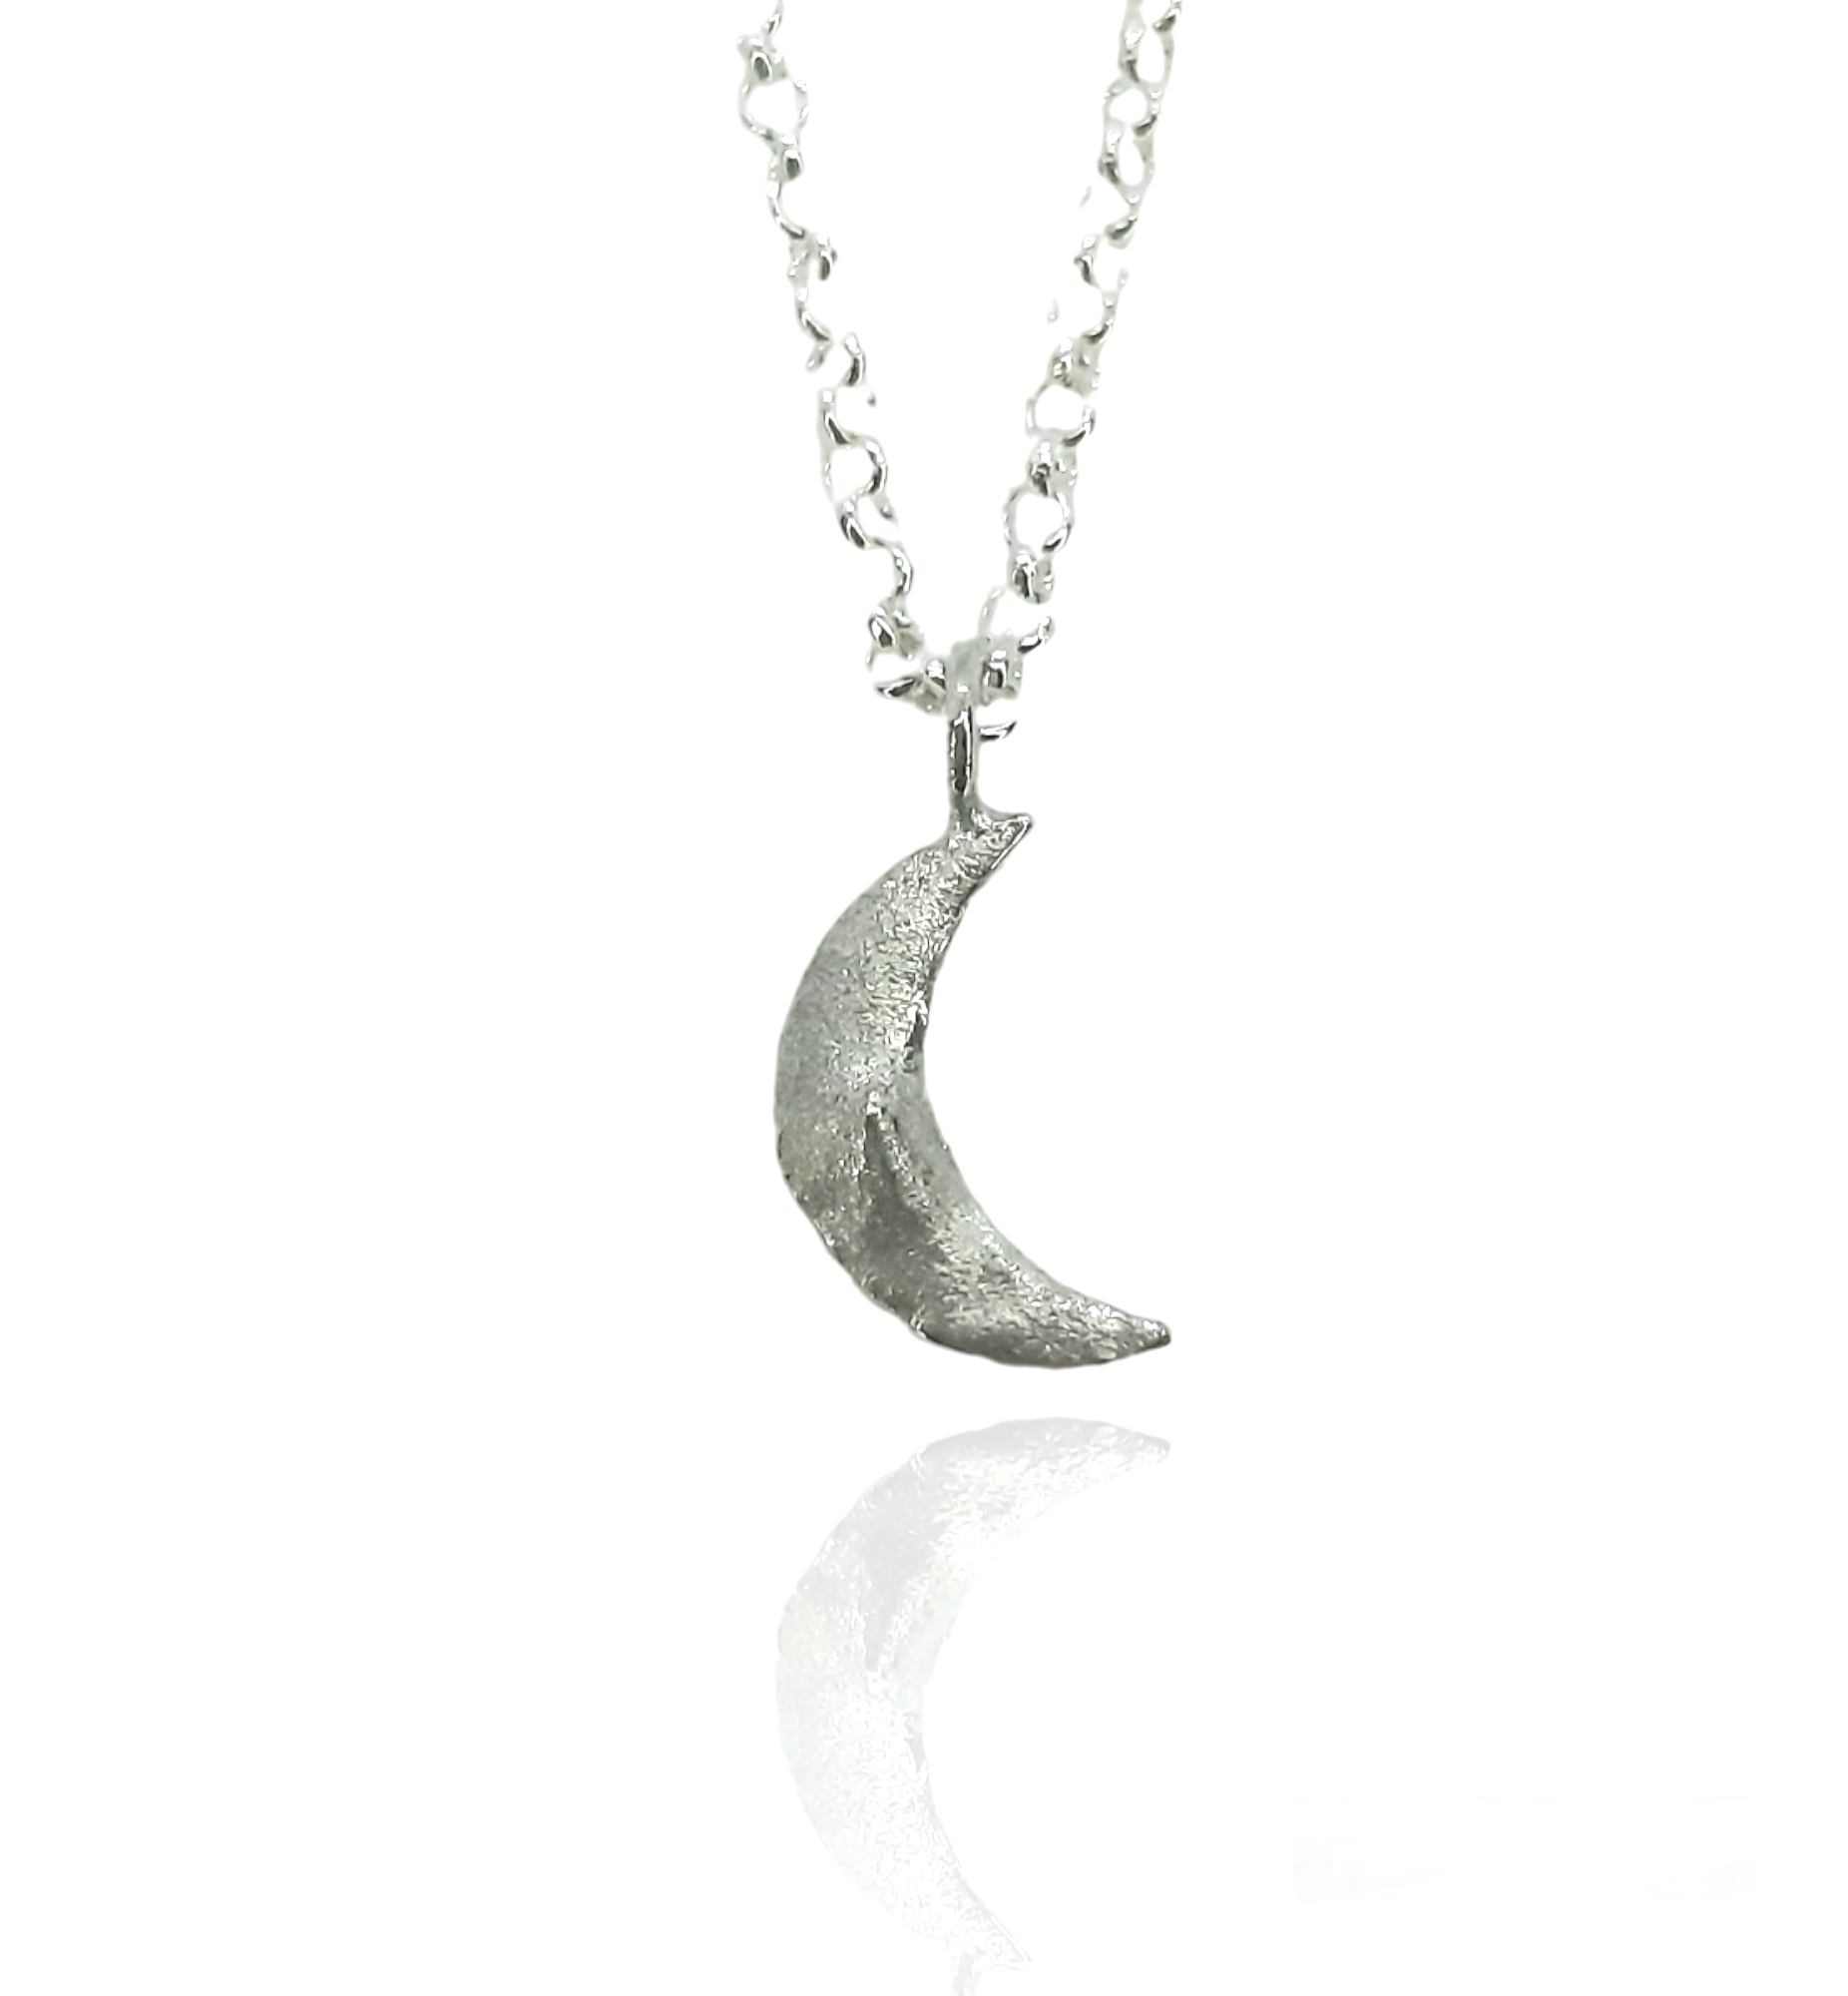 Molten Crescent Moon pendant - sterling silver necklace